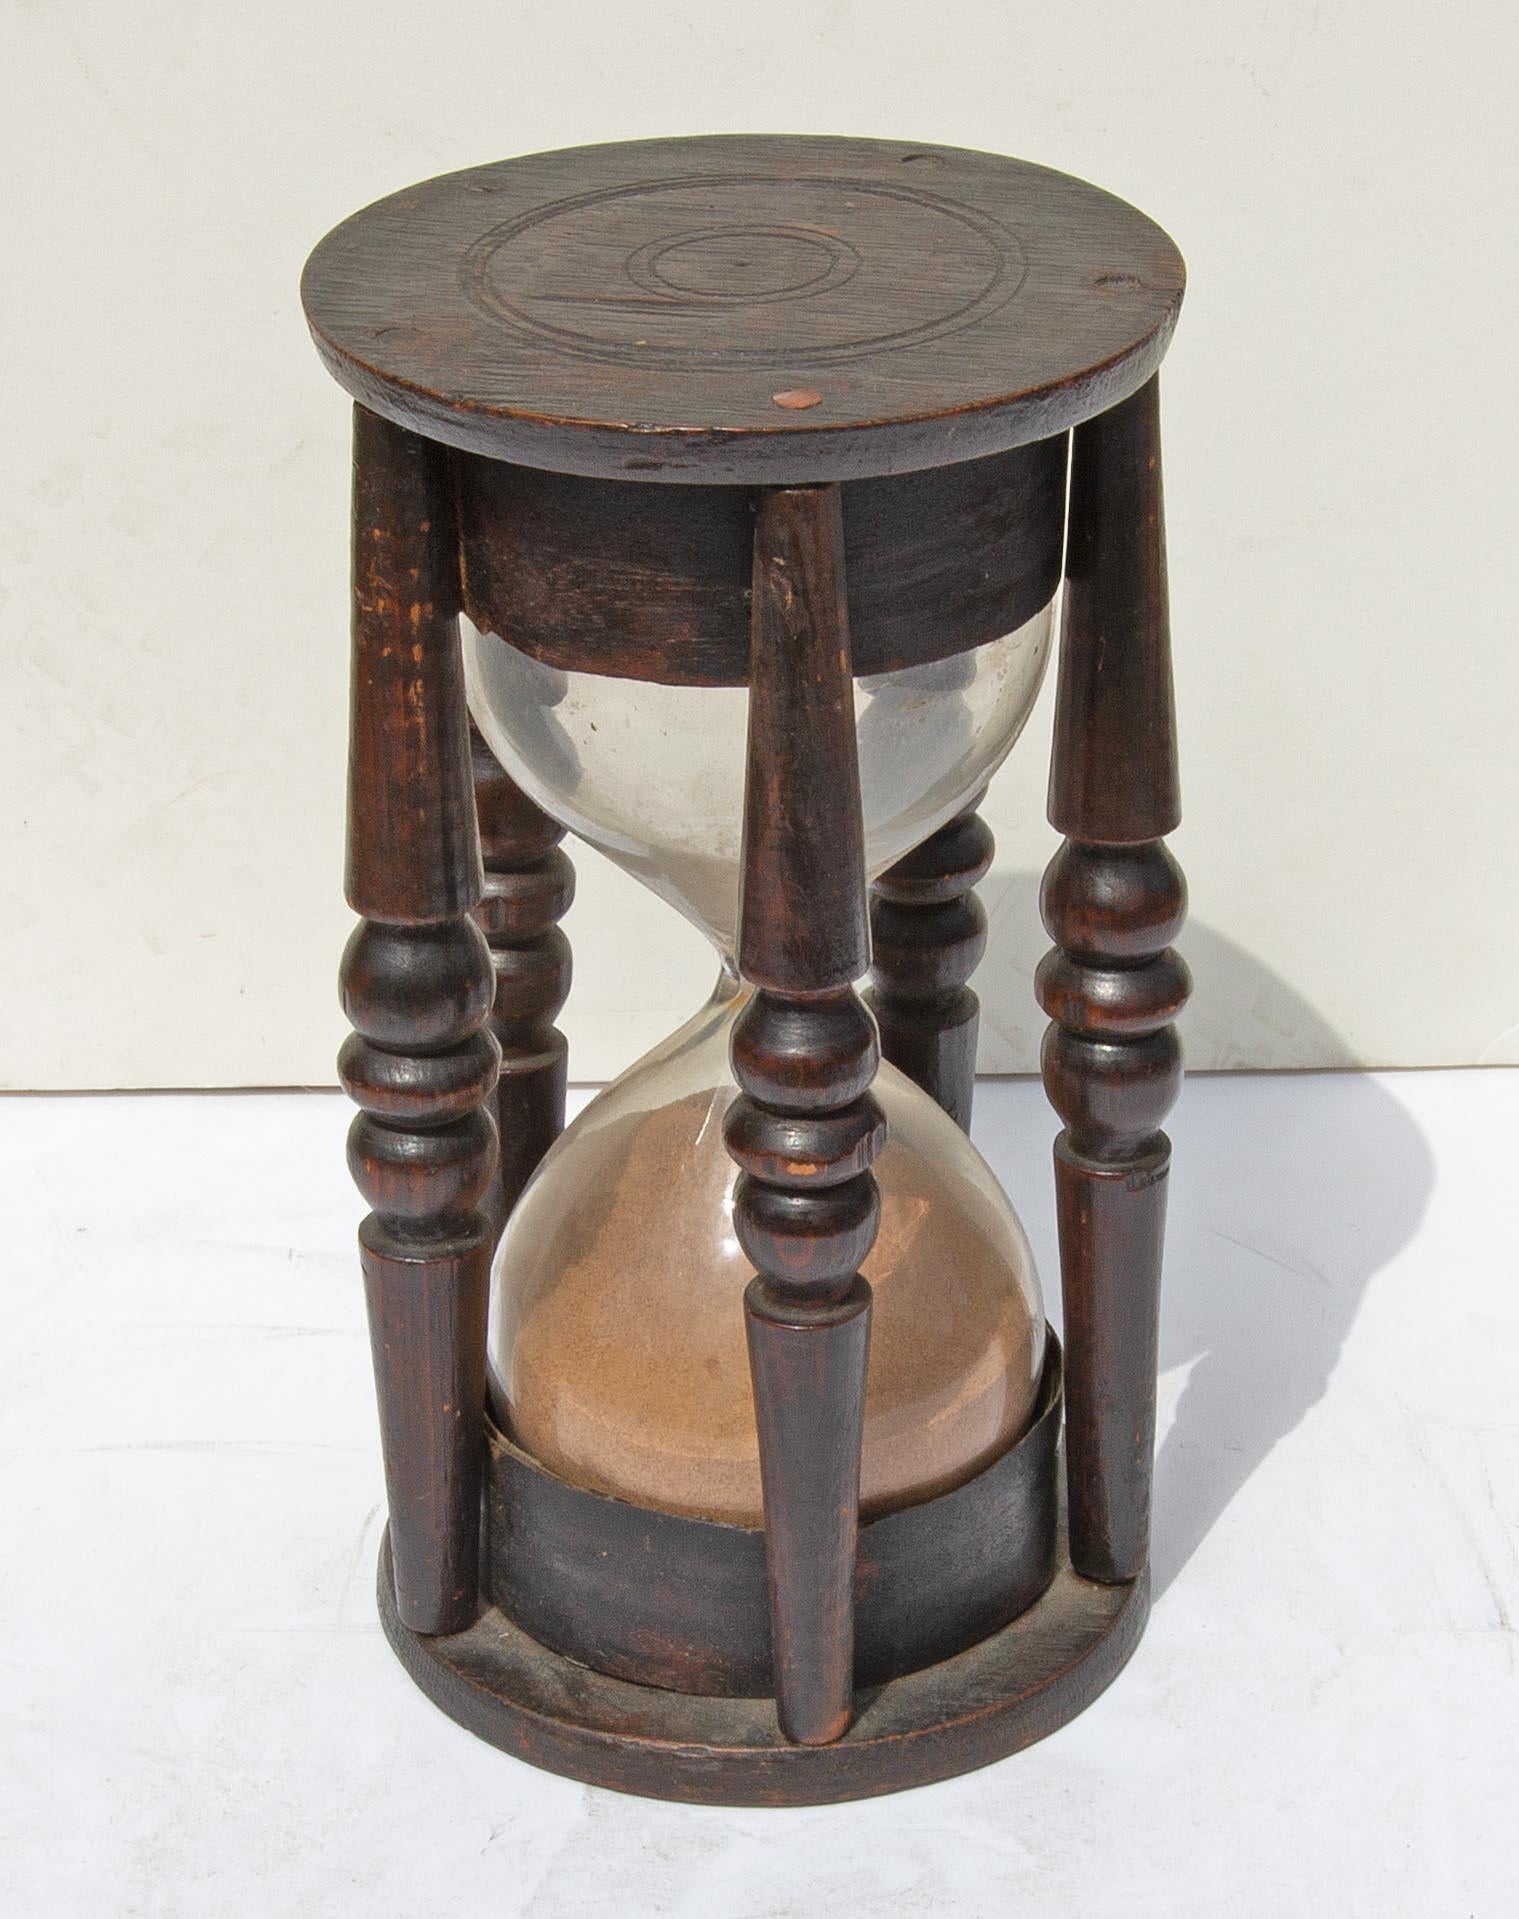 Early 19th century hourglass. Continental. Blown glass. Oak and pine.